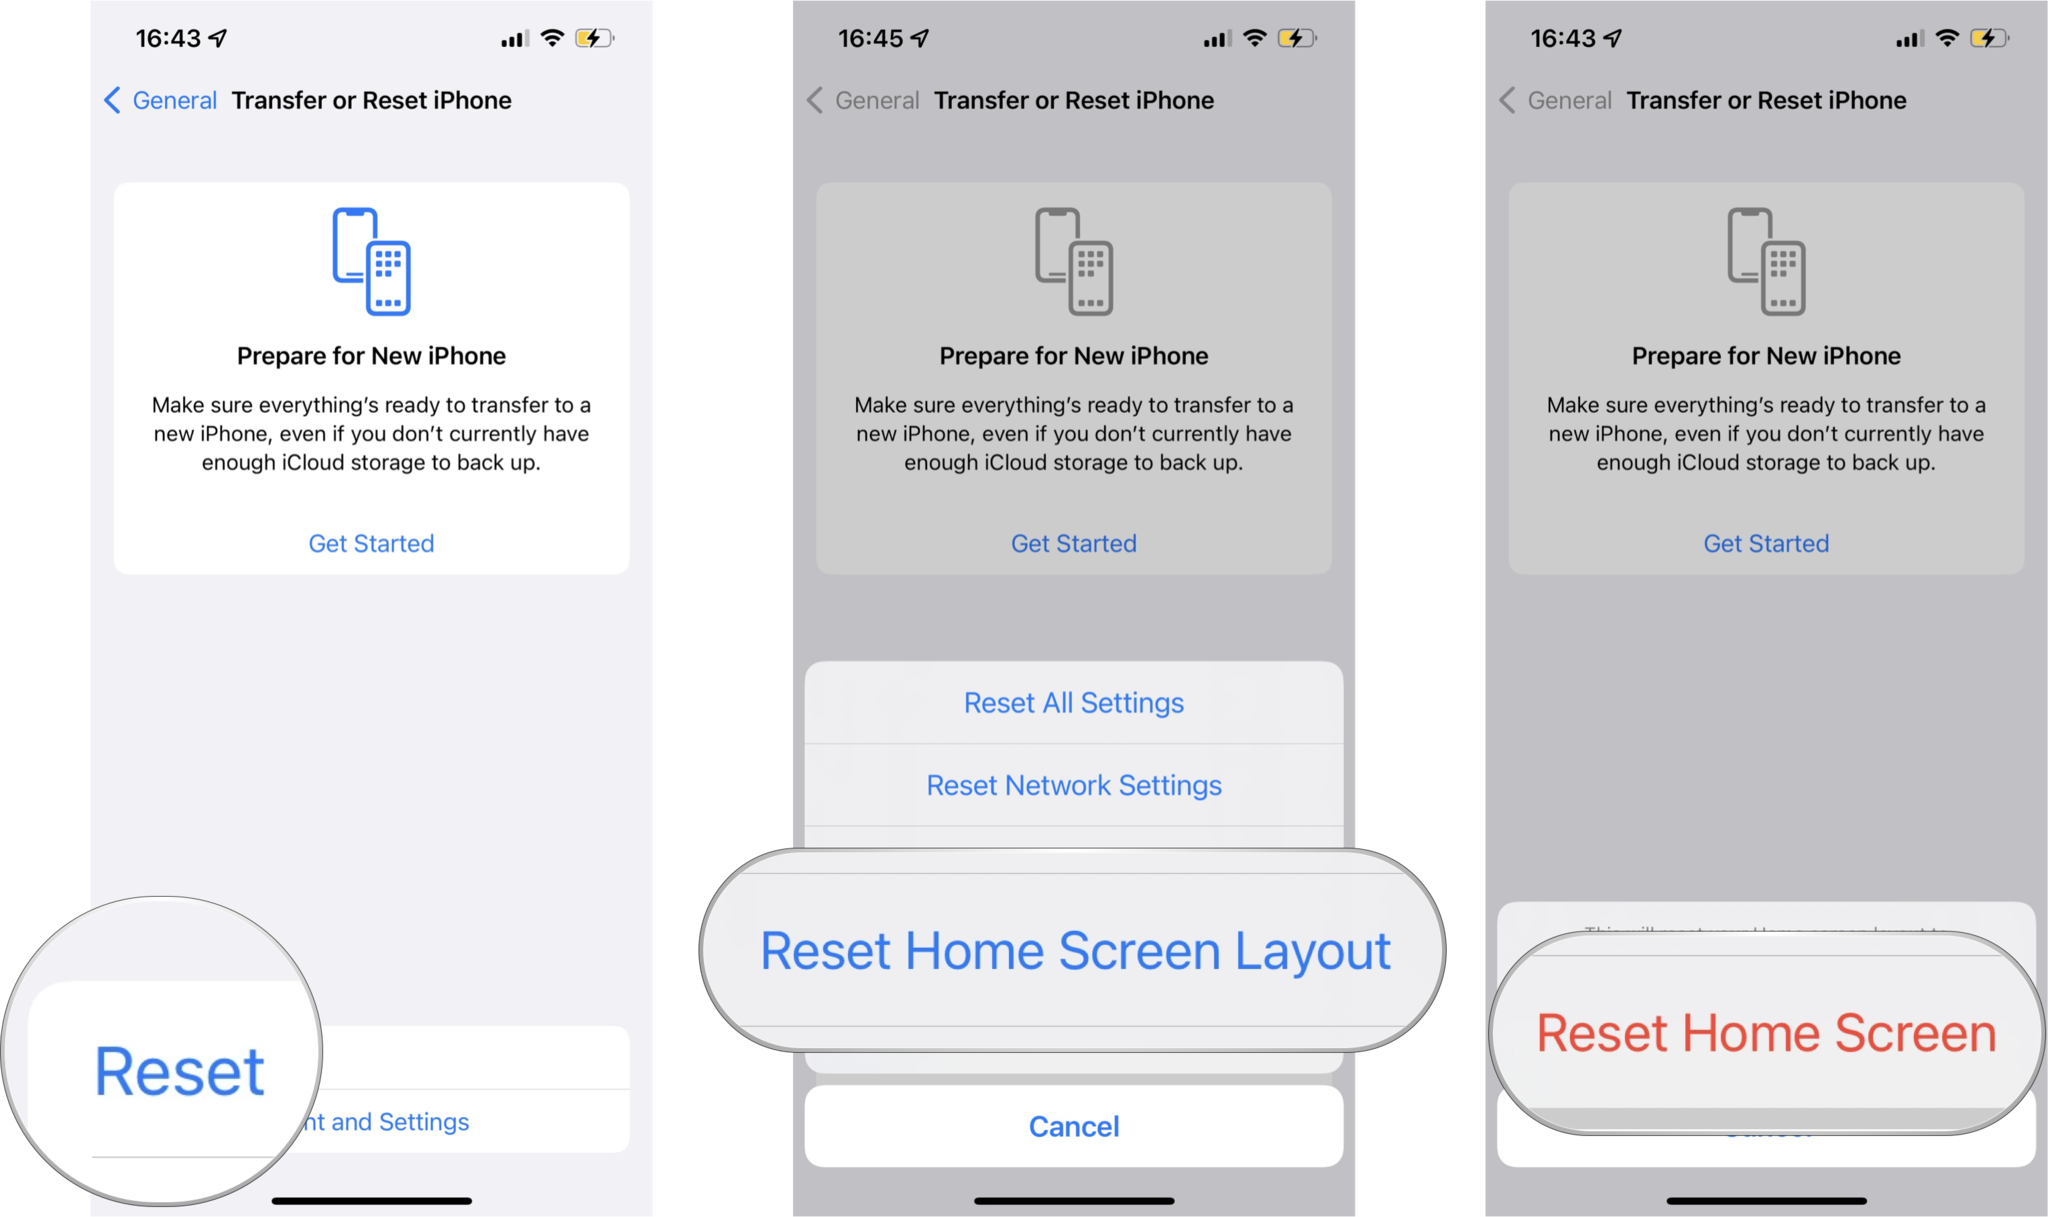 How to restore your Home screen to the default layout: Tap Reset, tap Reset Home Screen Layout, tap Reset Home Screen